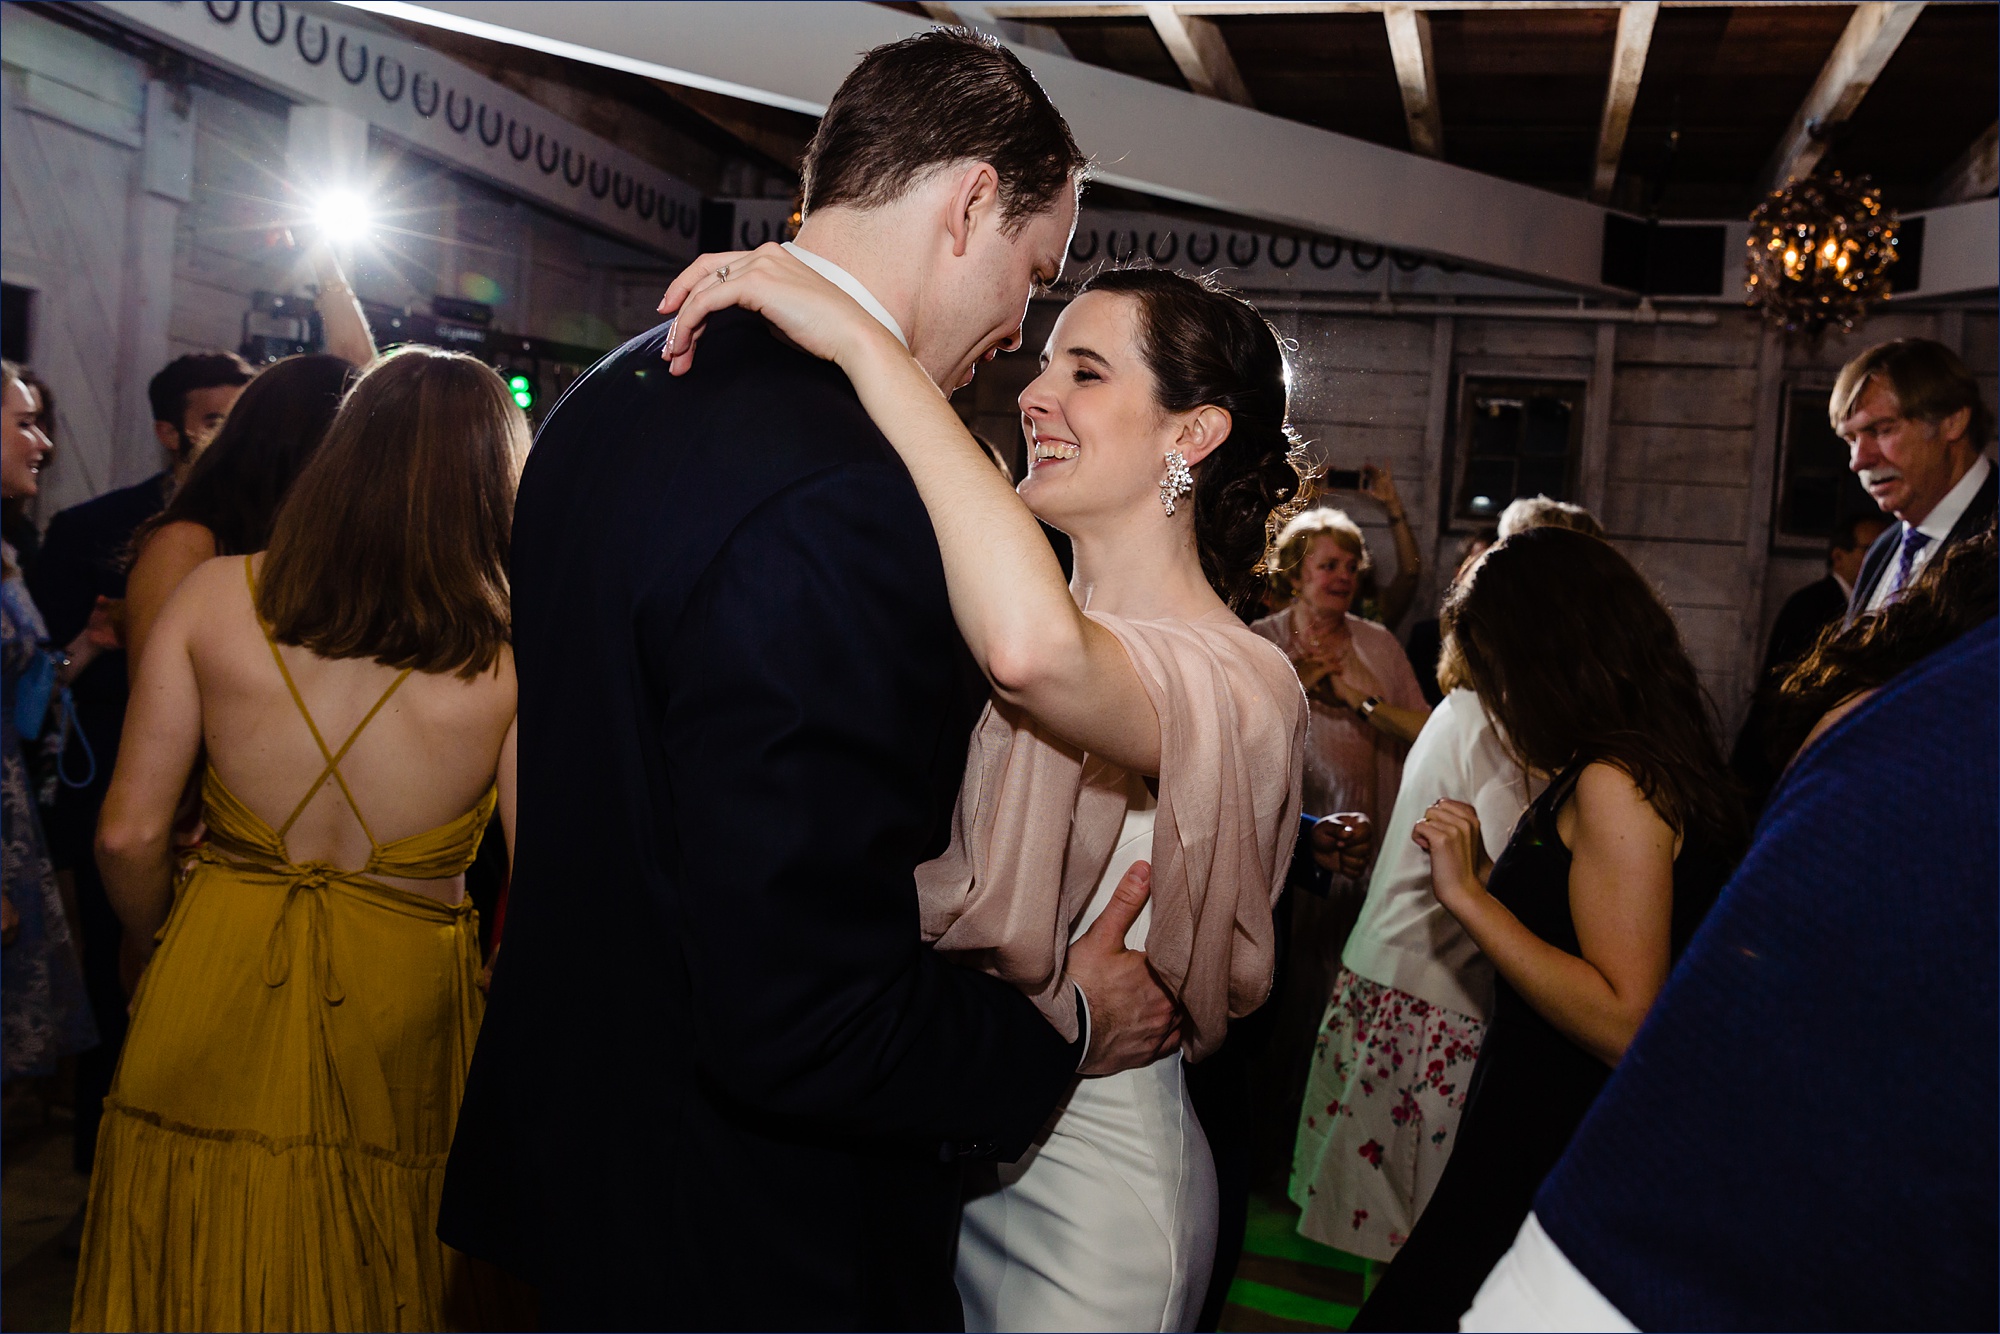 The bride and groom dance at their wedding reception in the barn and are full of smiles